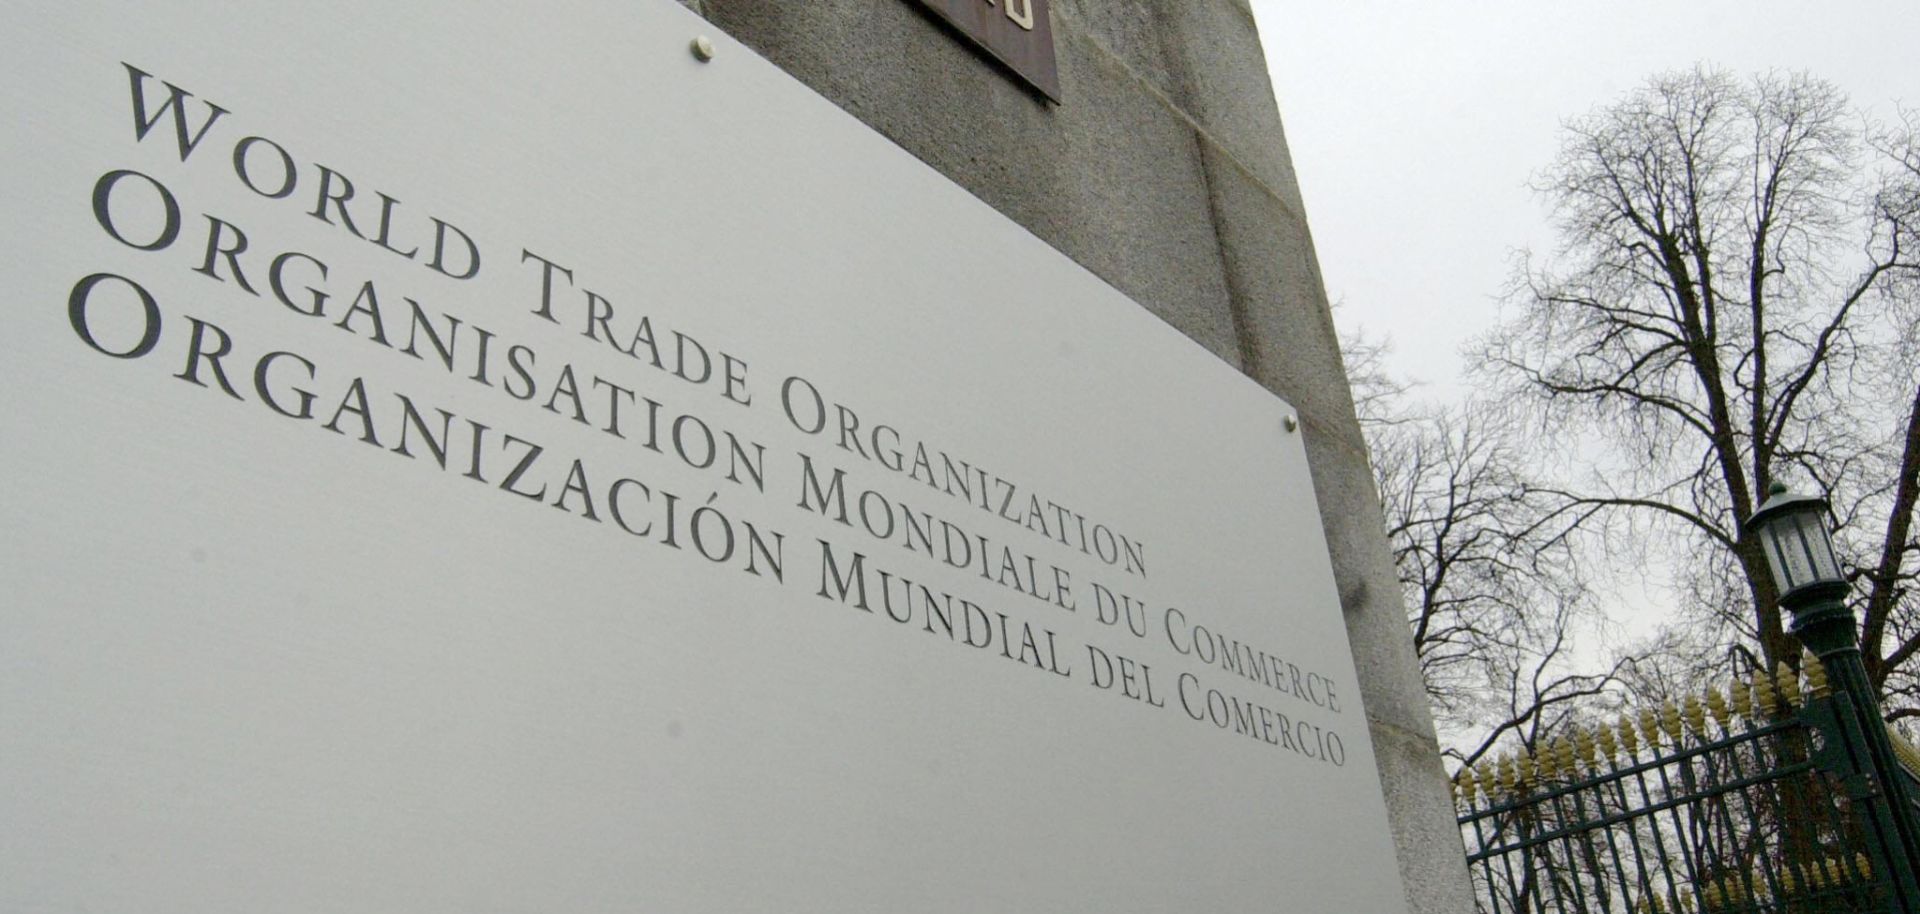 File photo of the entrance of the World Trade Organization's headquarters in Geneva.